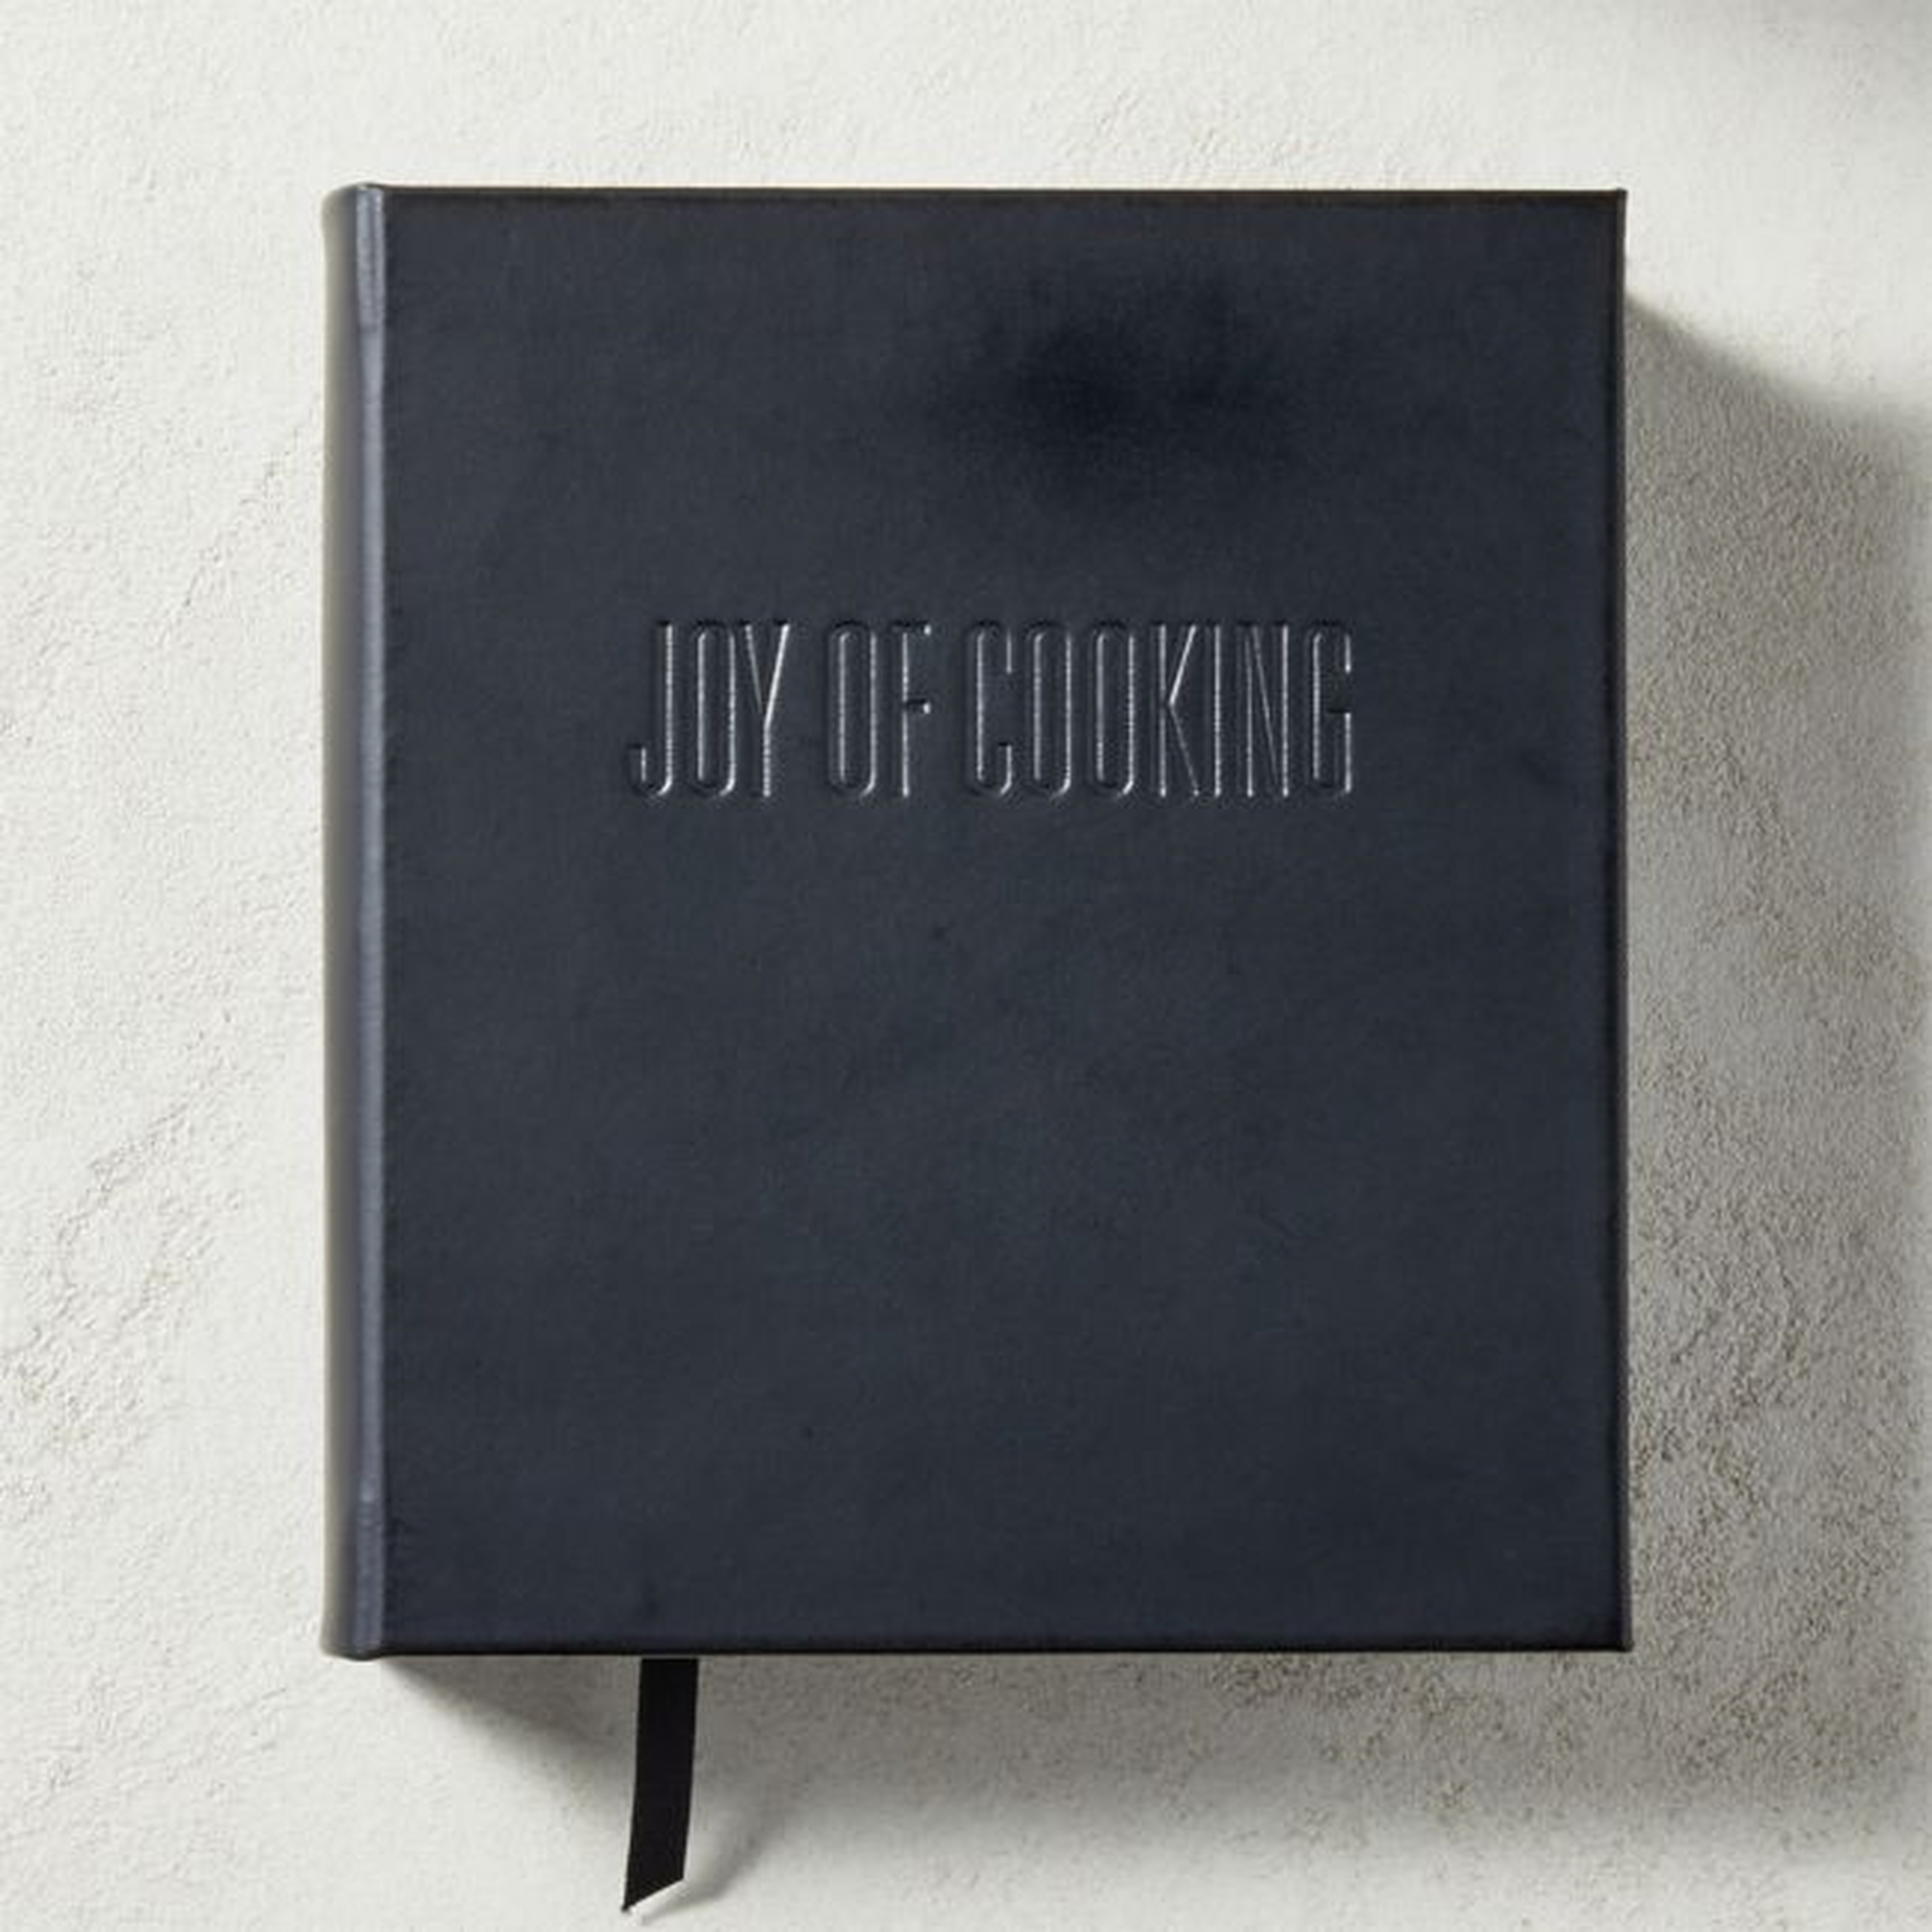 'Joy of Cooking' Cookbook, Black Leather Edition - CB2